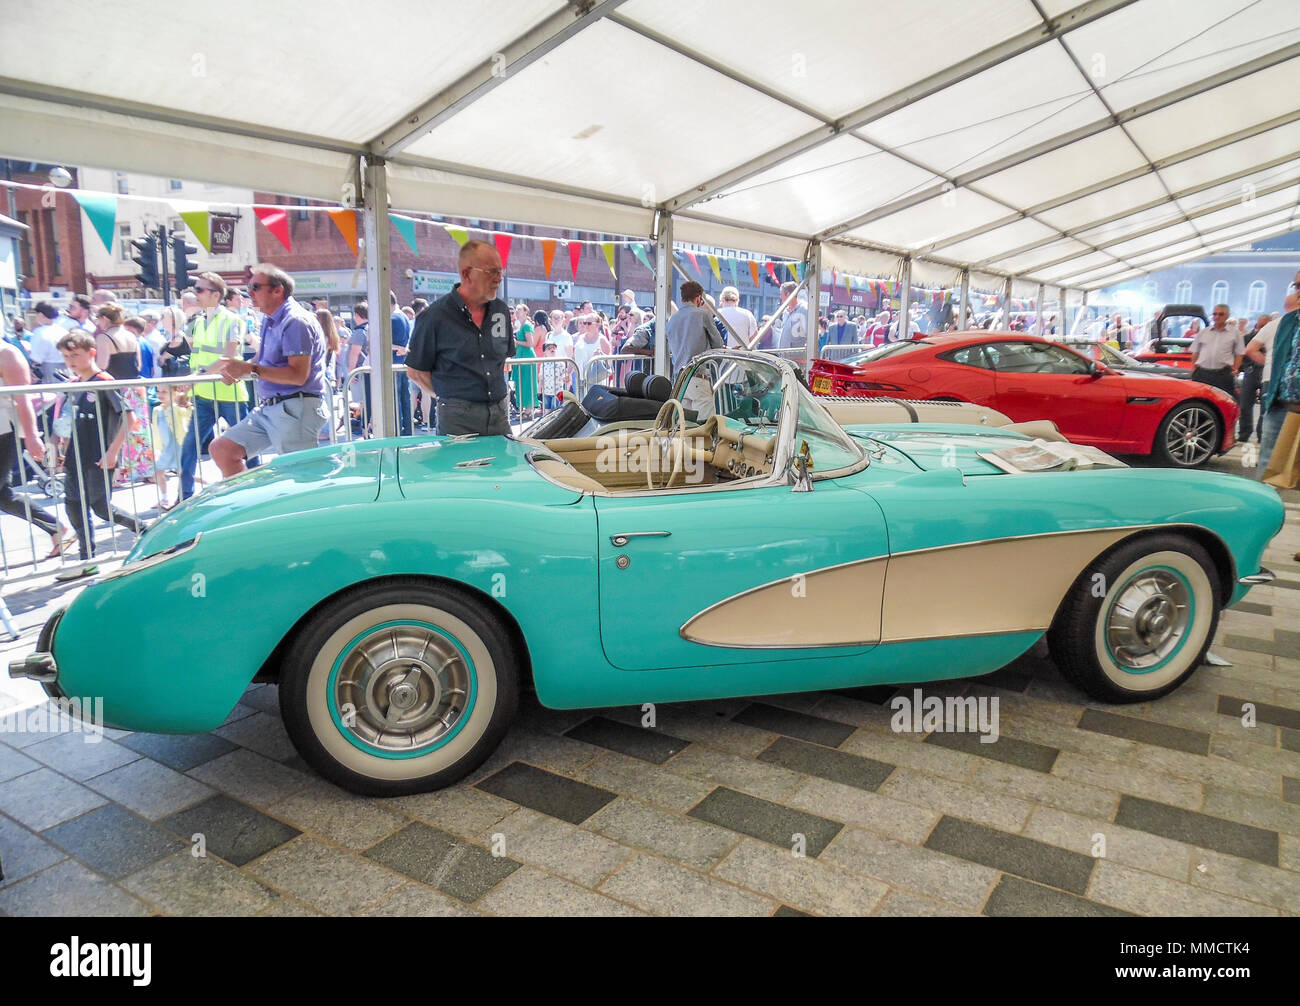 Turquoise Chevrolet Corvette  sports car at the Supercar Event,High Street,Stockton on Tees,England,UK Stock Photo